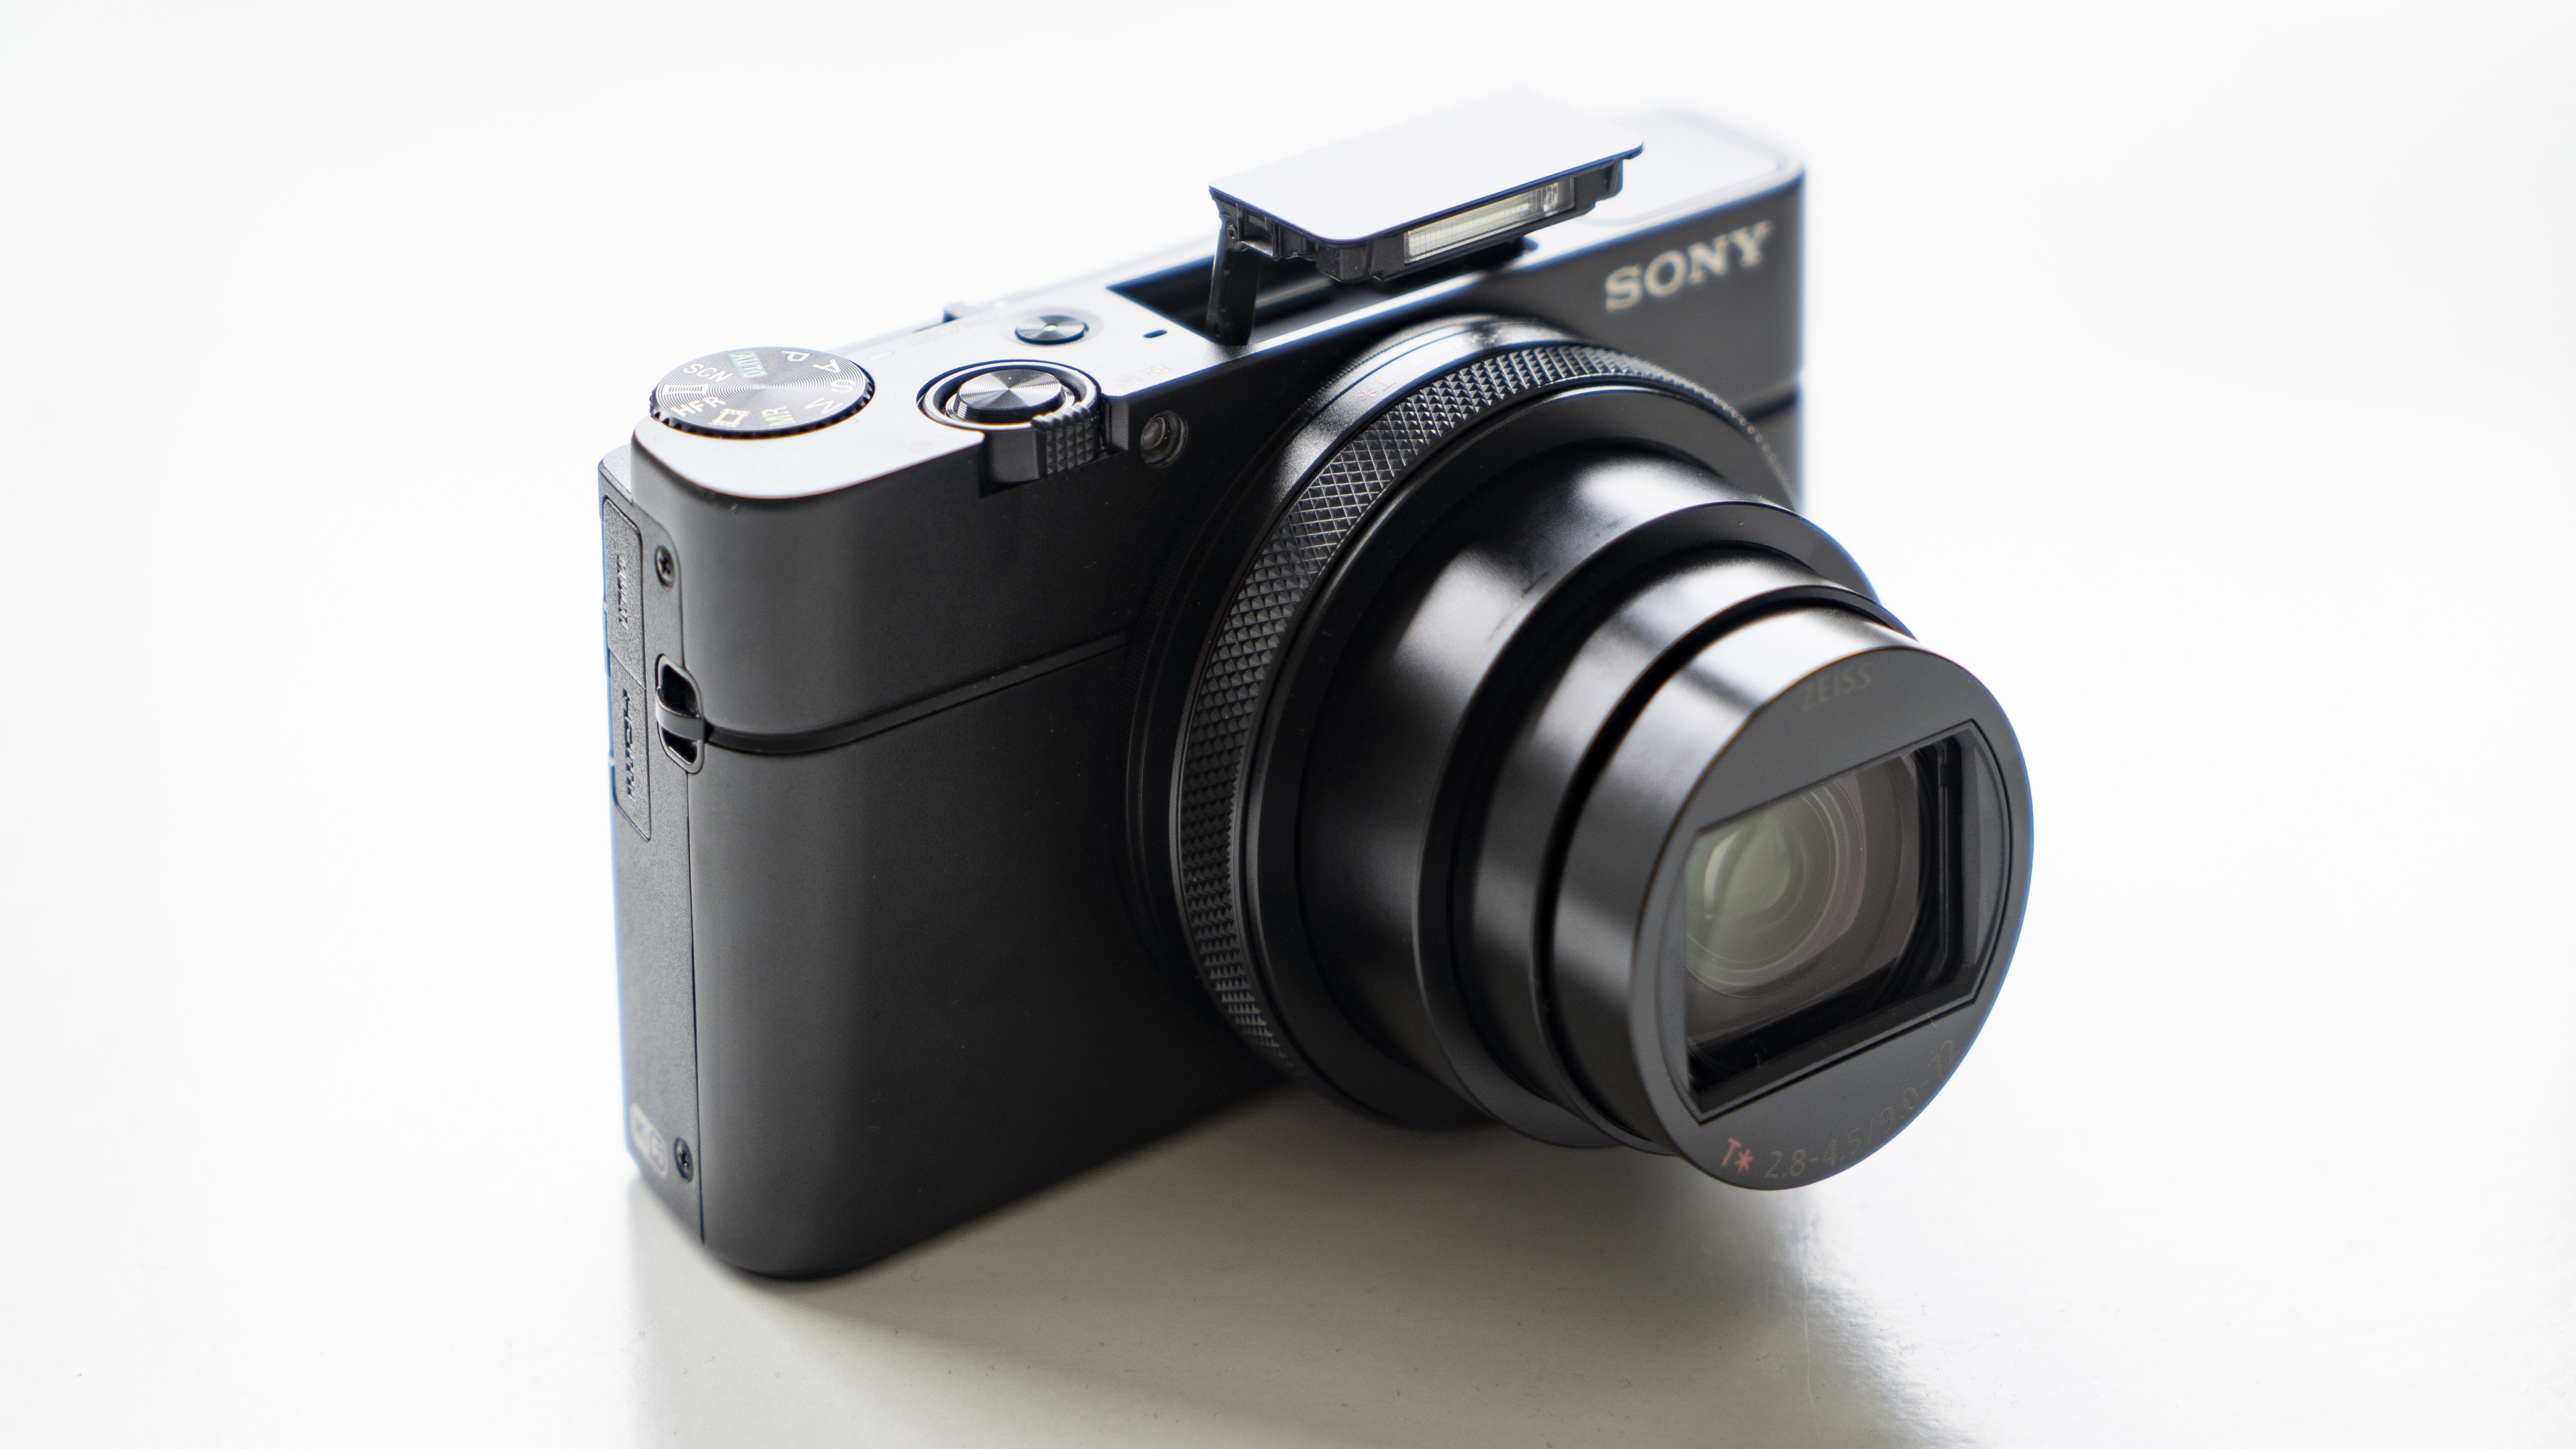 Best compact camera: Sony Cyber-shot RX100 VI